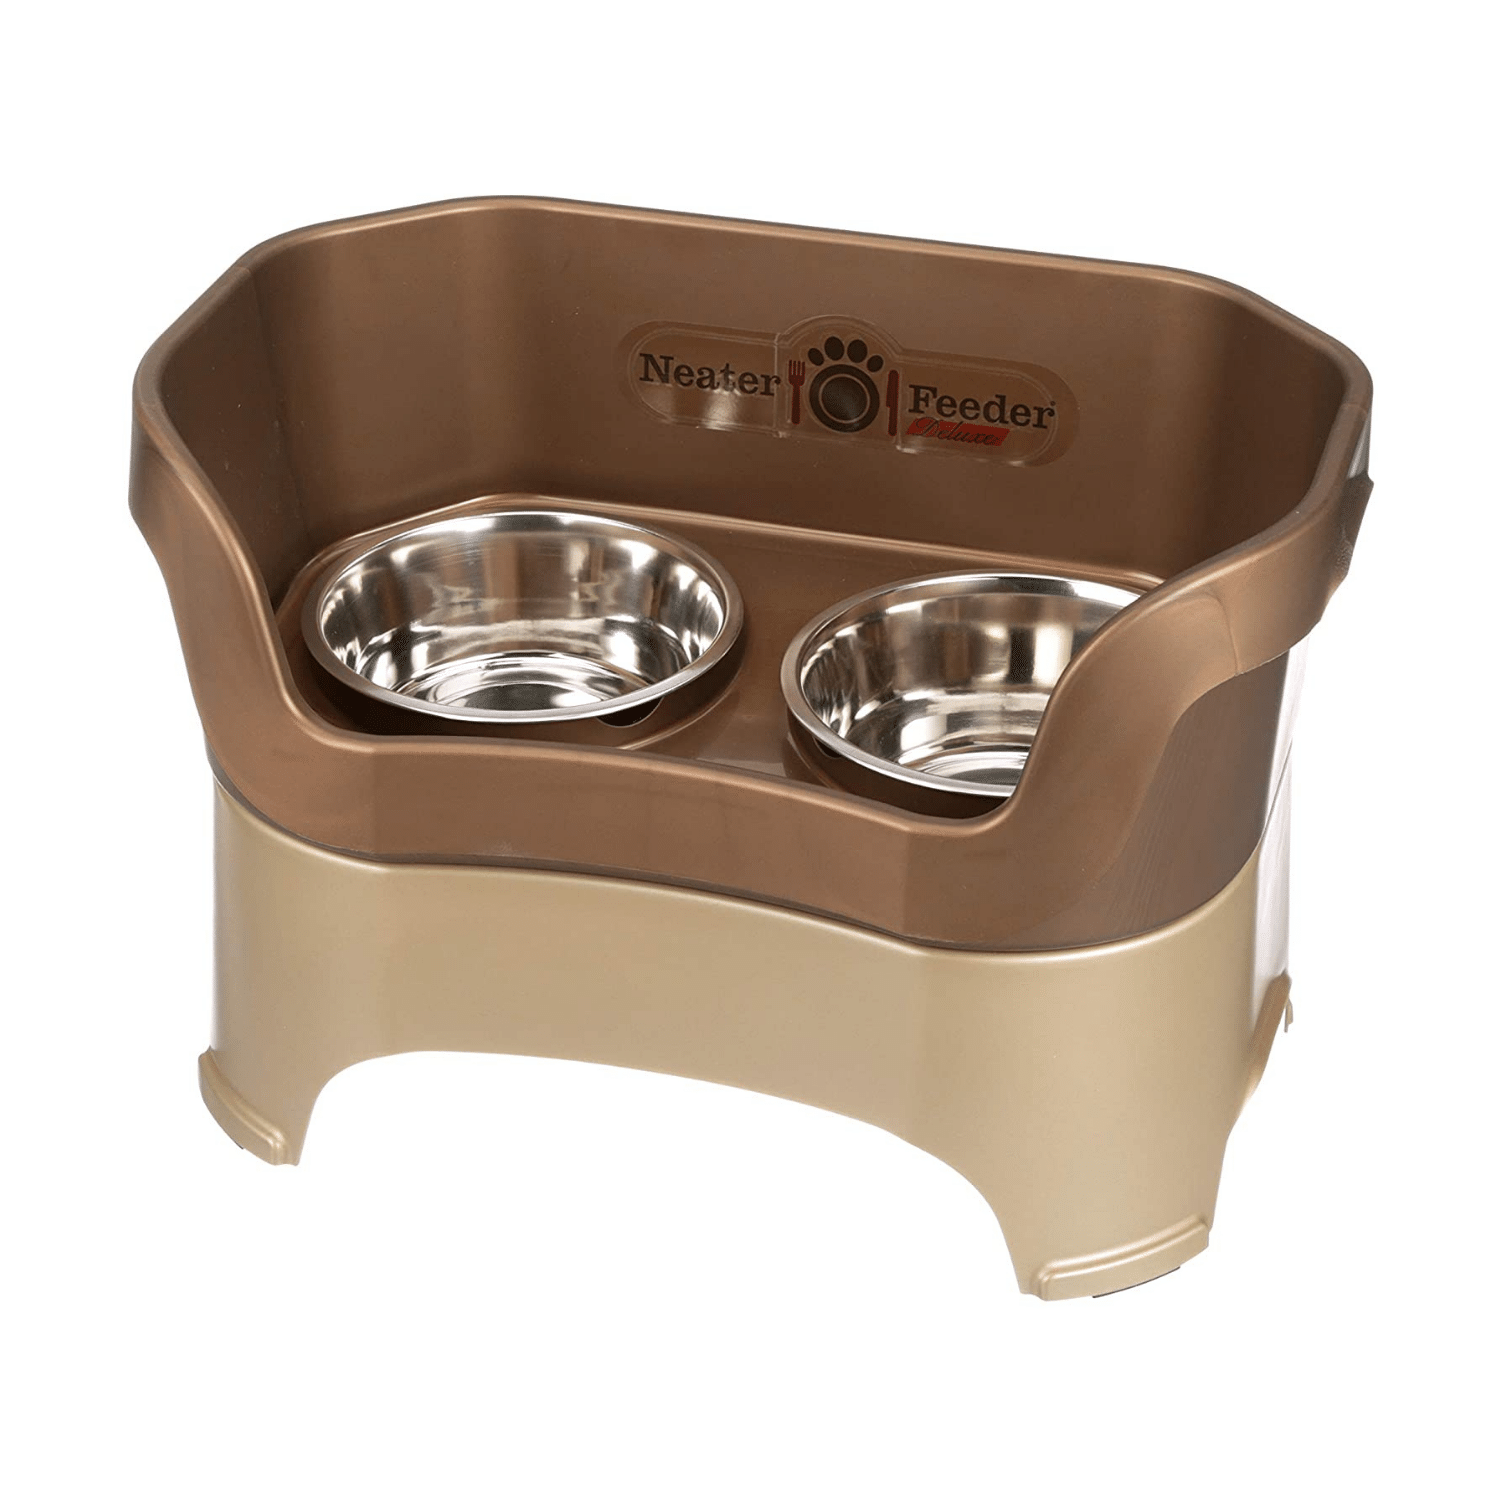 Neater Pets Feeder Elevated Dog & Cat Bowls